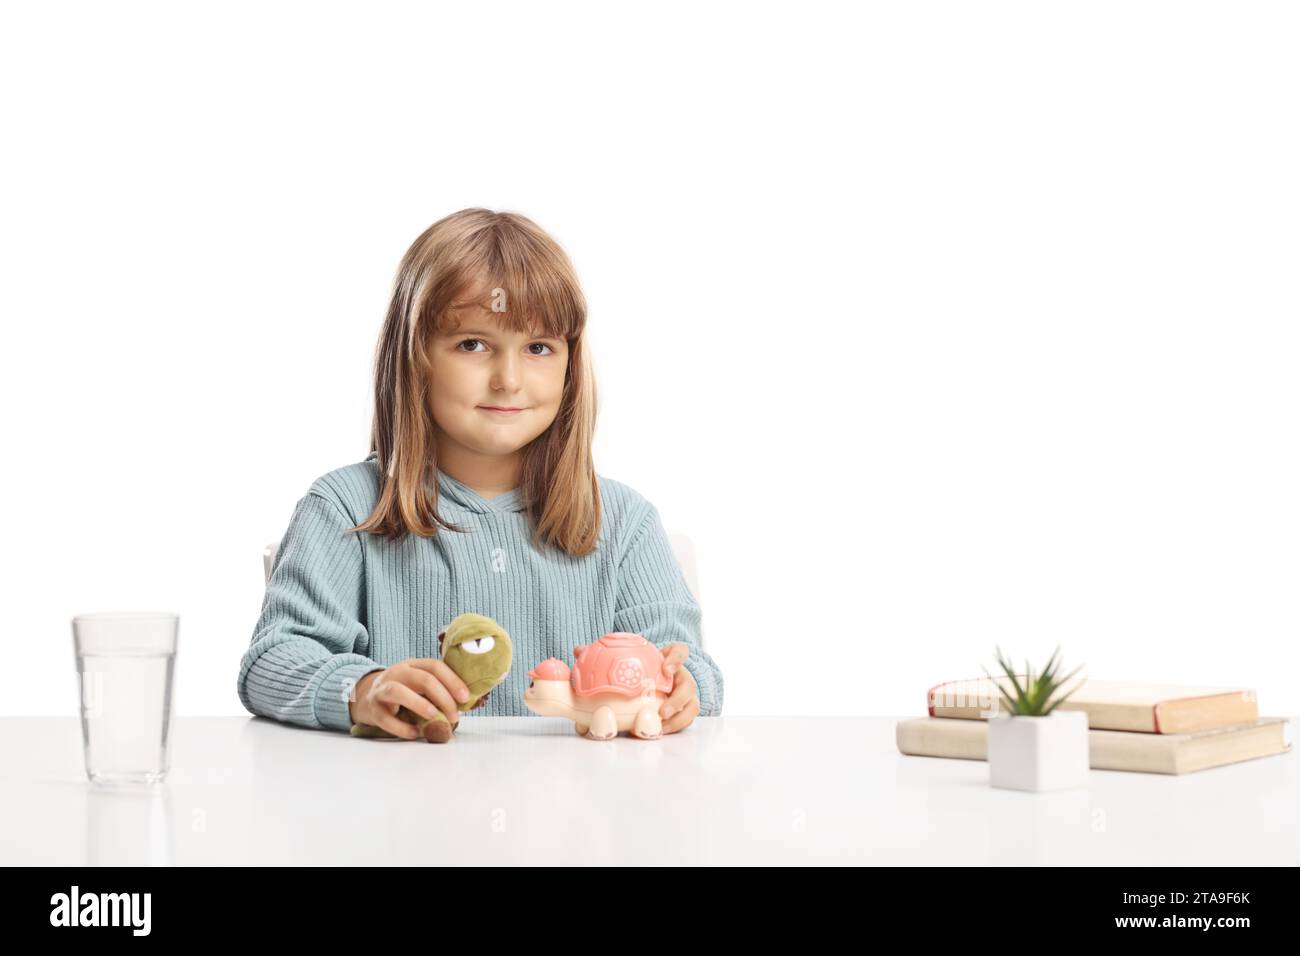 Cute little girl sitting at a table and playing with animal toys Stock Photo